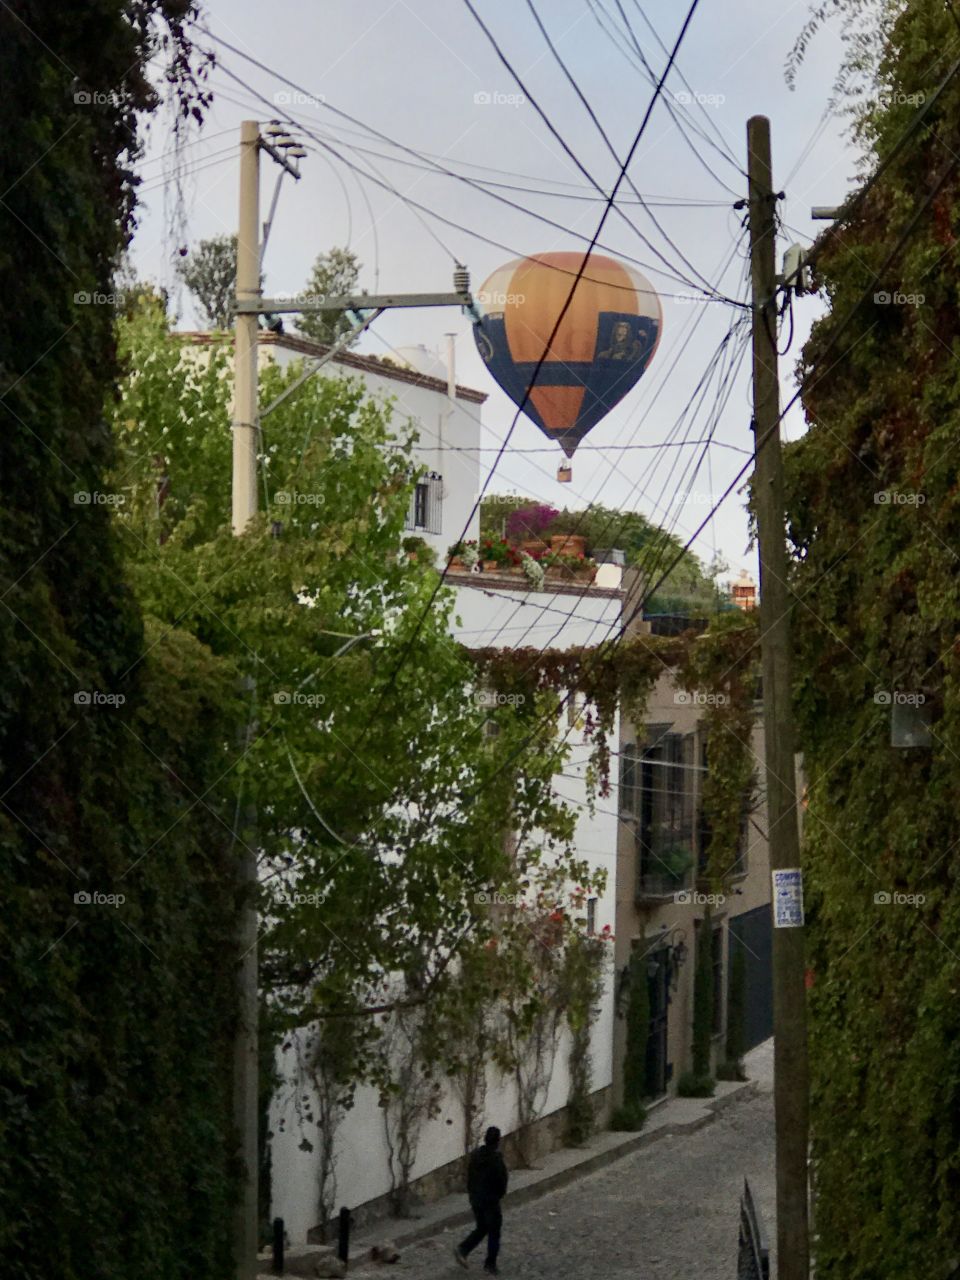 A Balloon flying over San Miguel de Allende seen from the door where I was staying